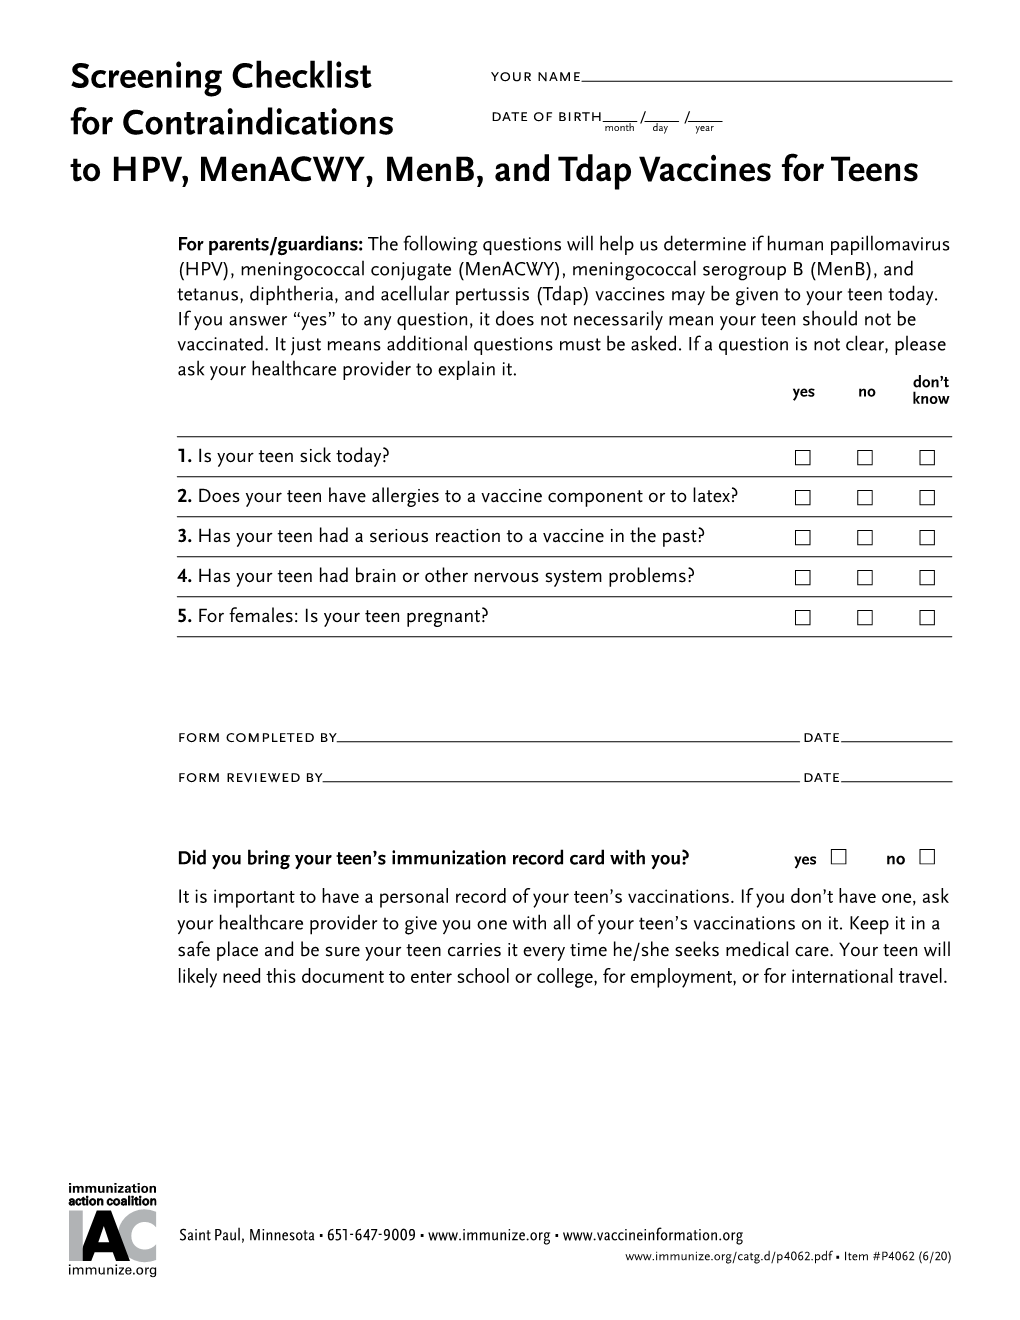 At Screening Checklist for Contraindications to HPV